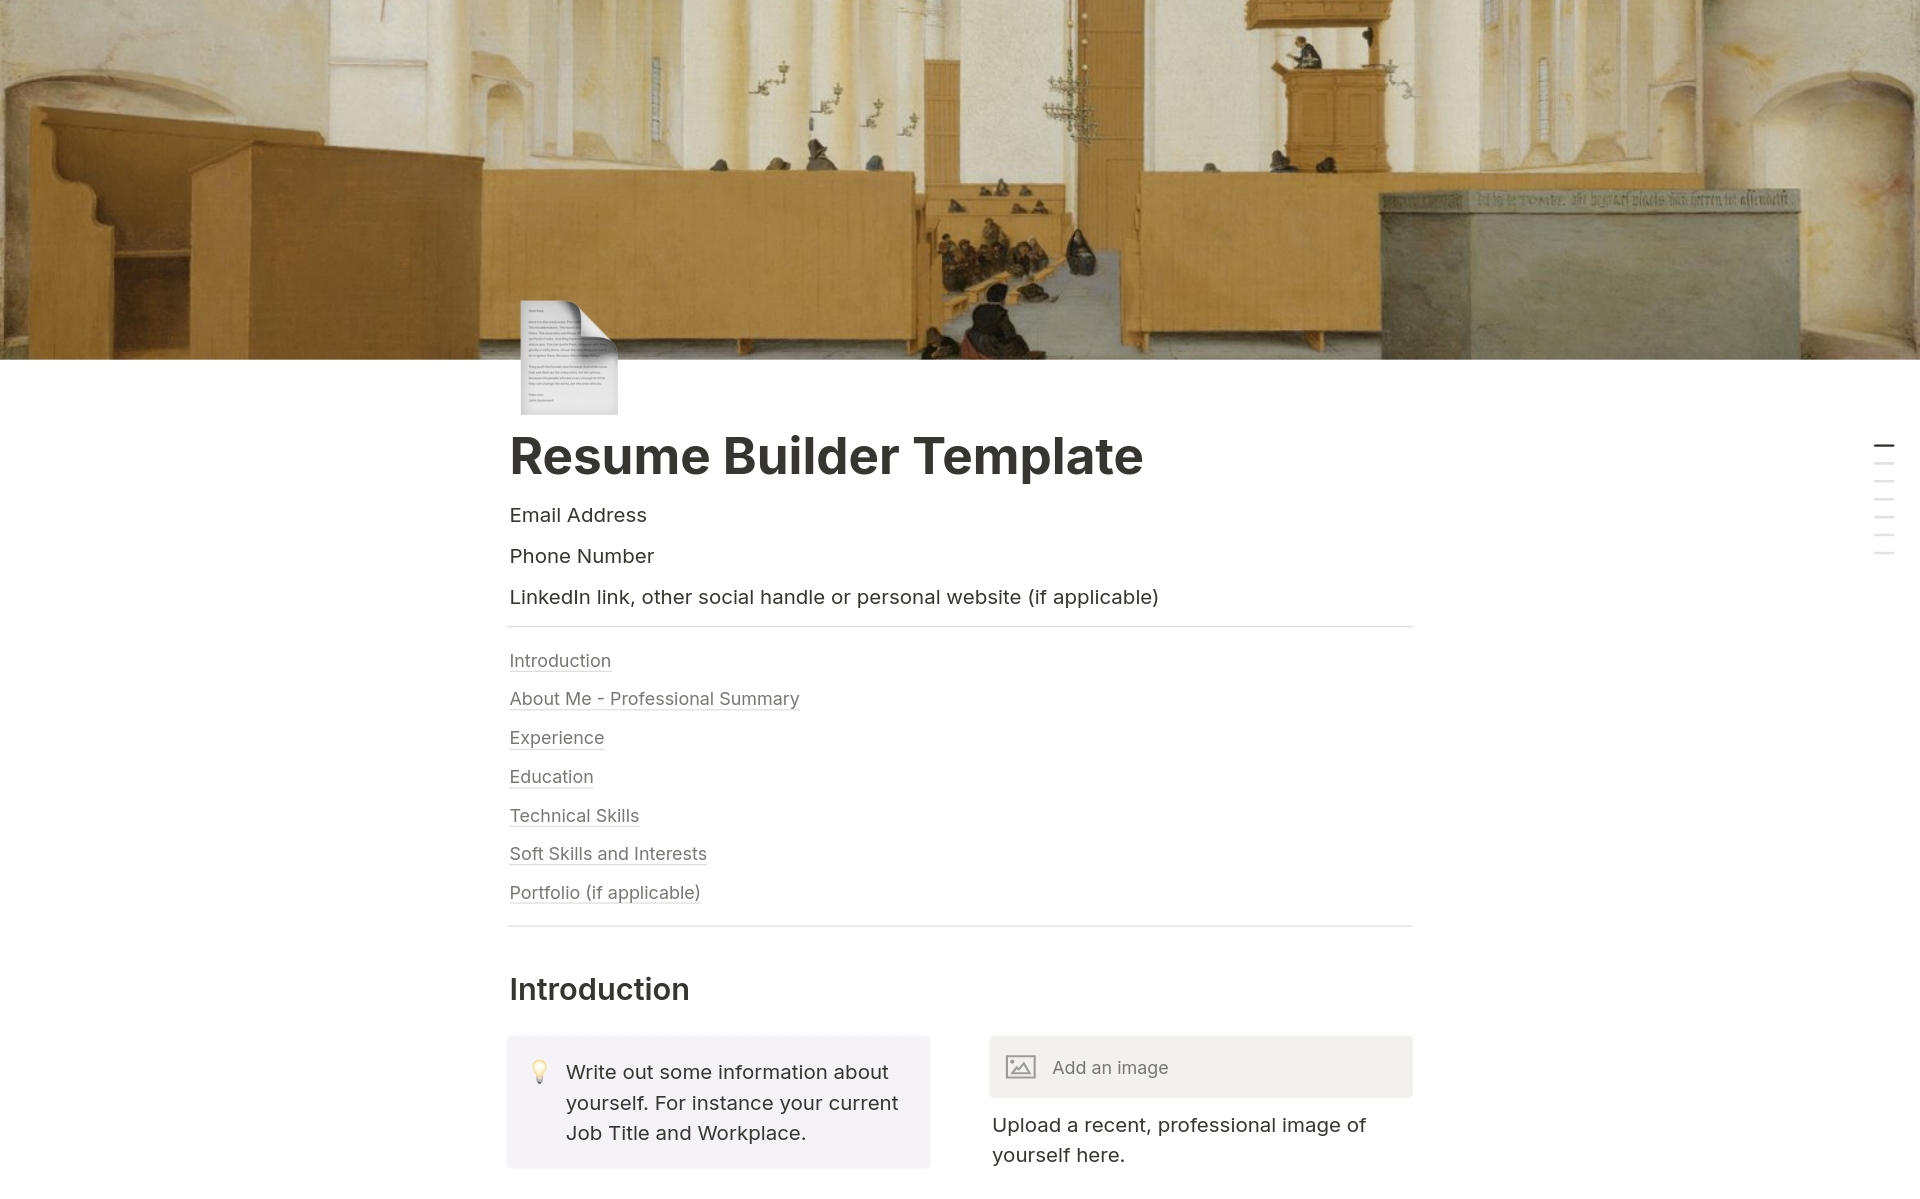 A template preview for Resume Builder